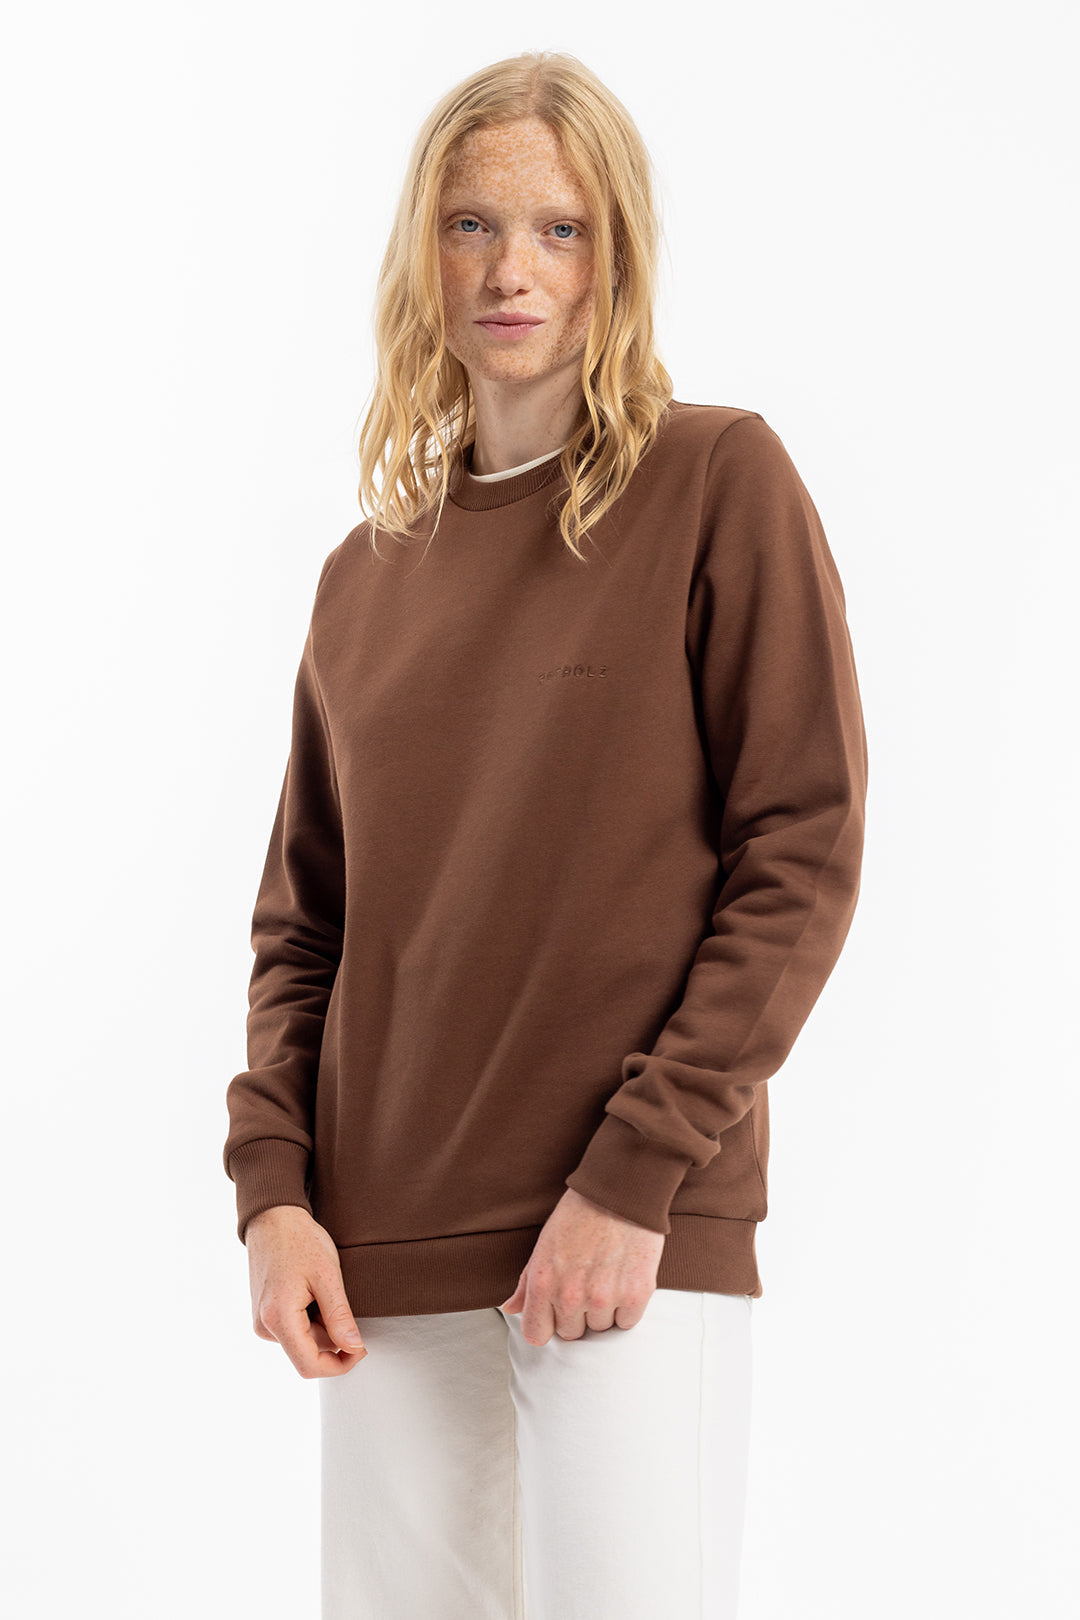 Brown sweater logo made of organic cotton from Rotholz